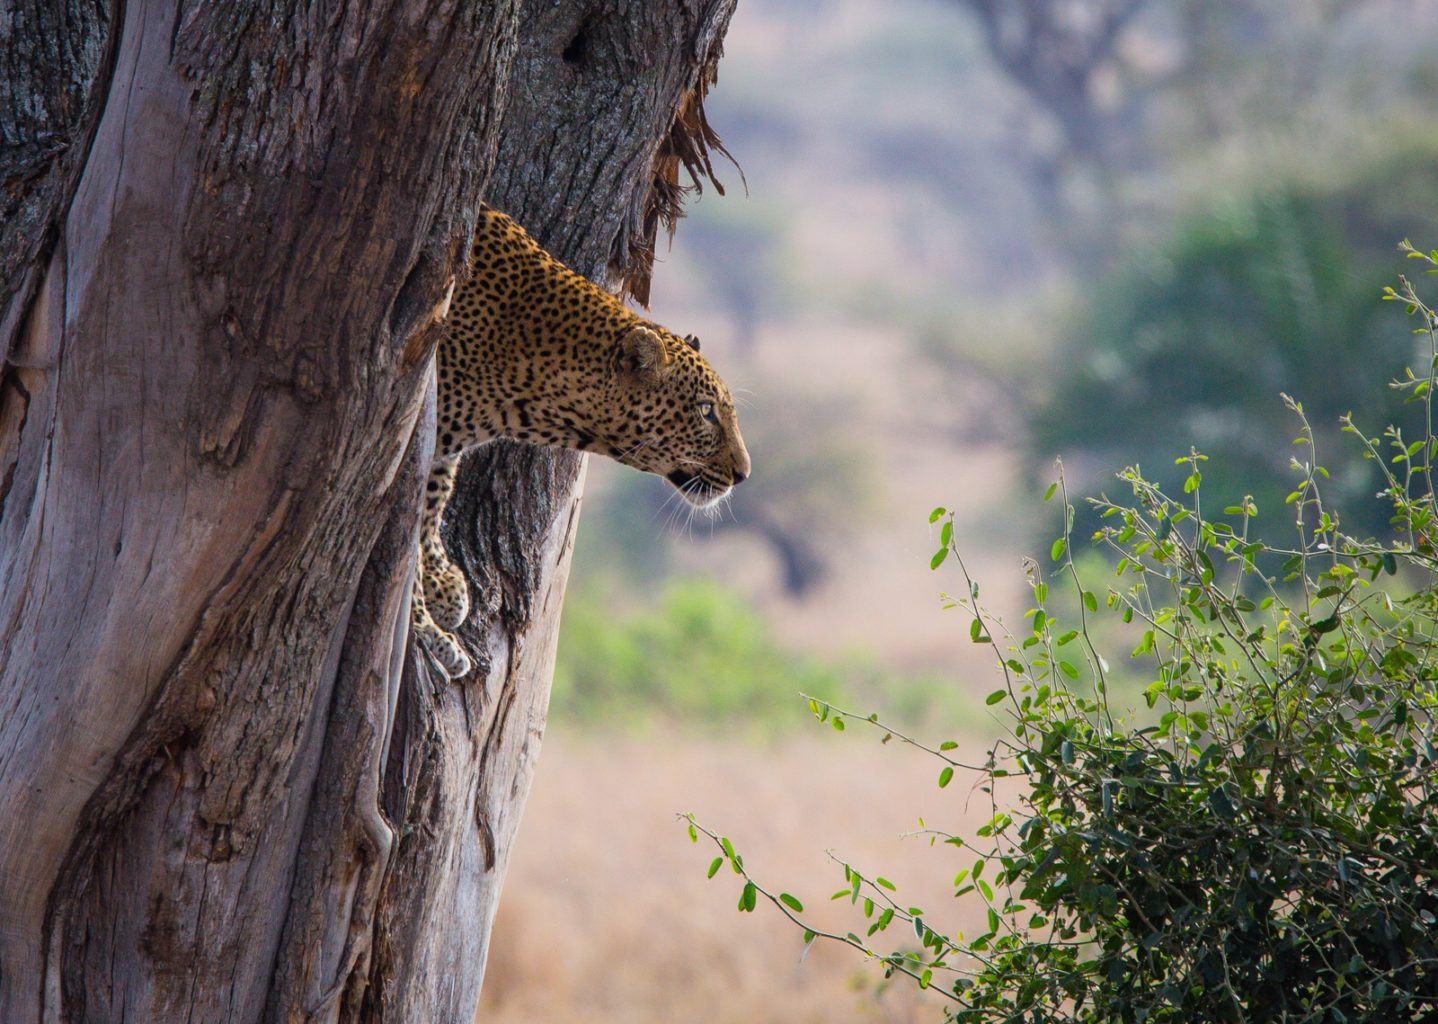 A rare sight, this leopard was peaking out of the tree before jumping and walking away.